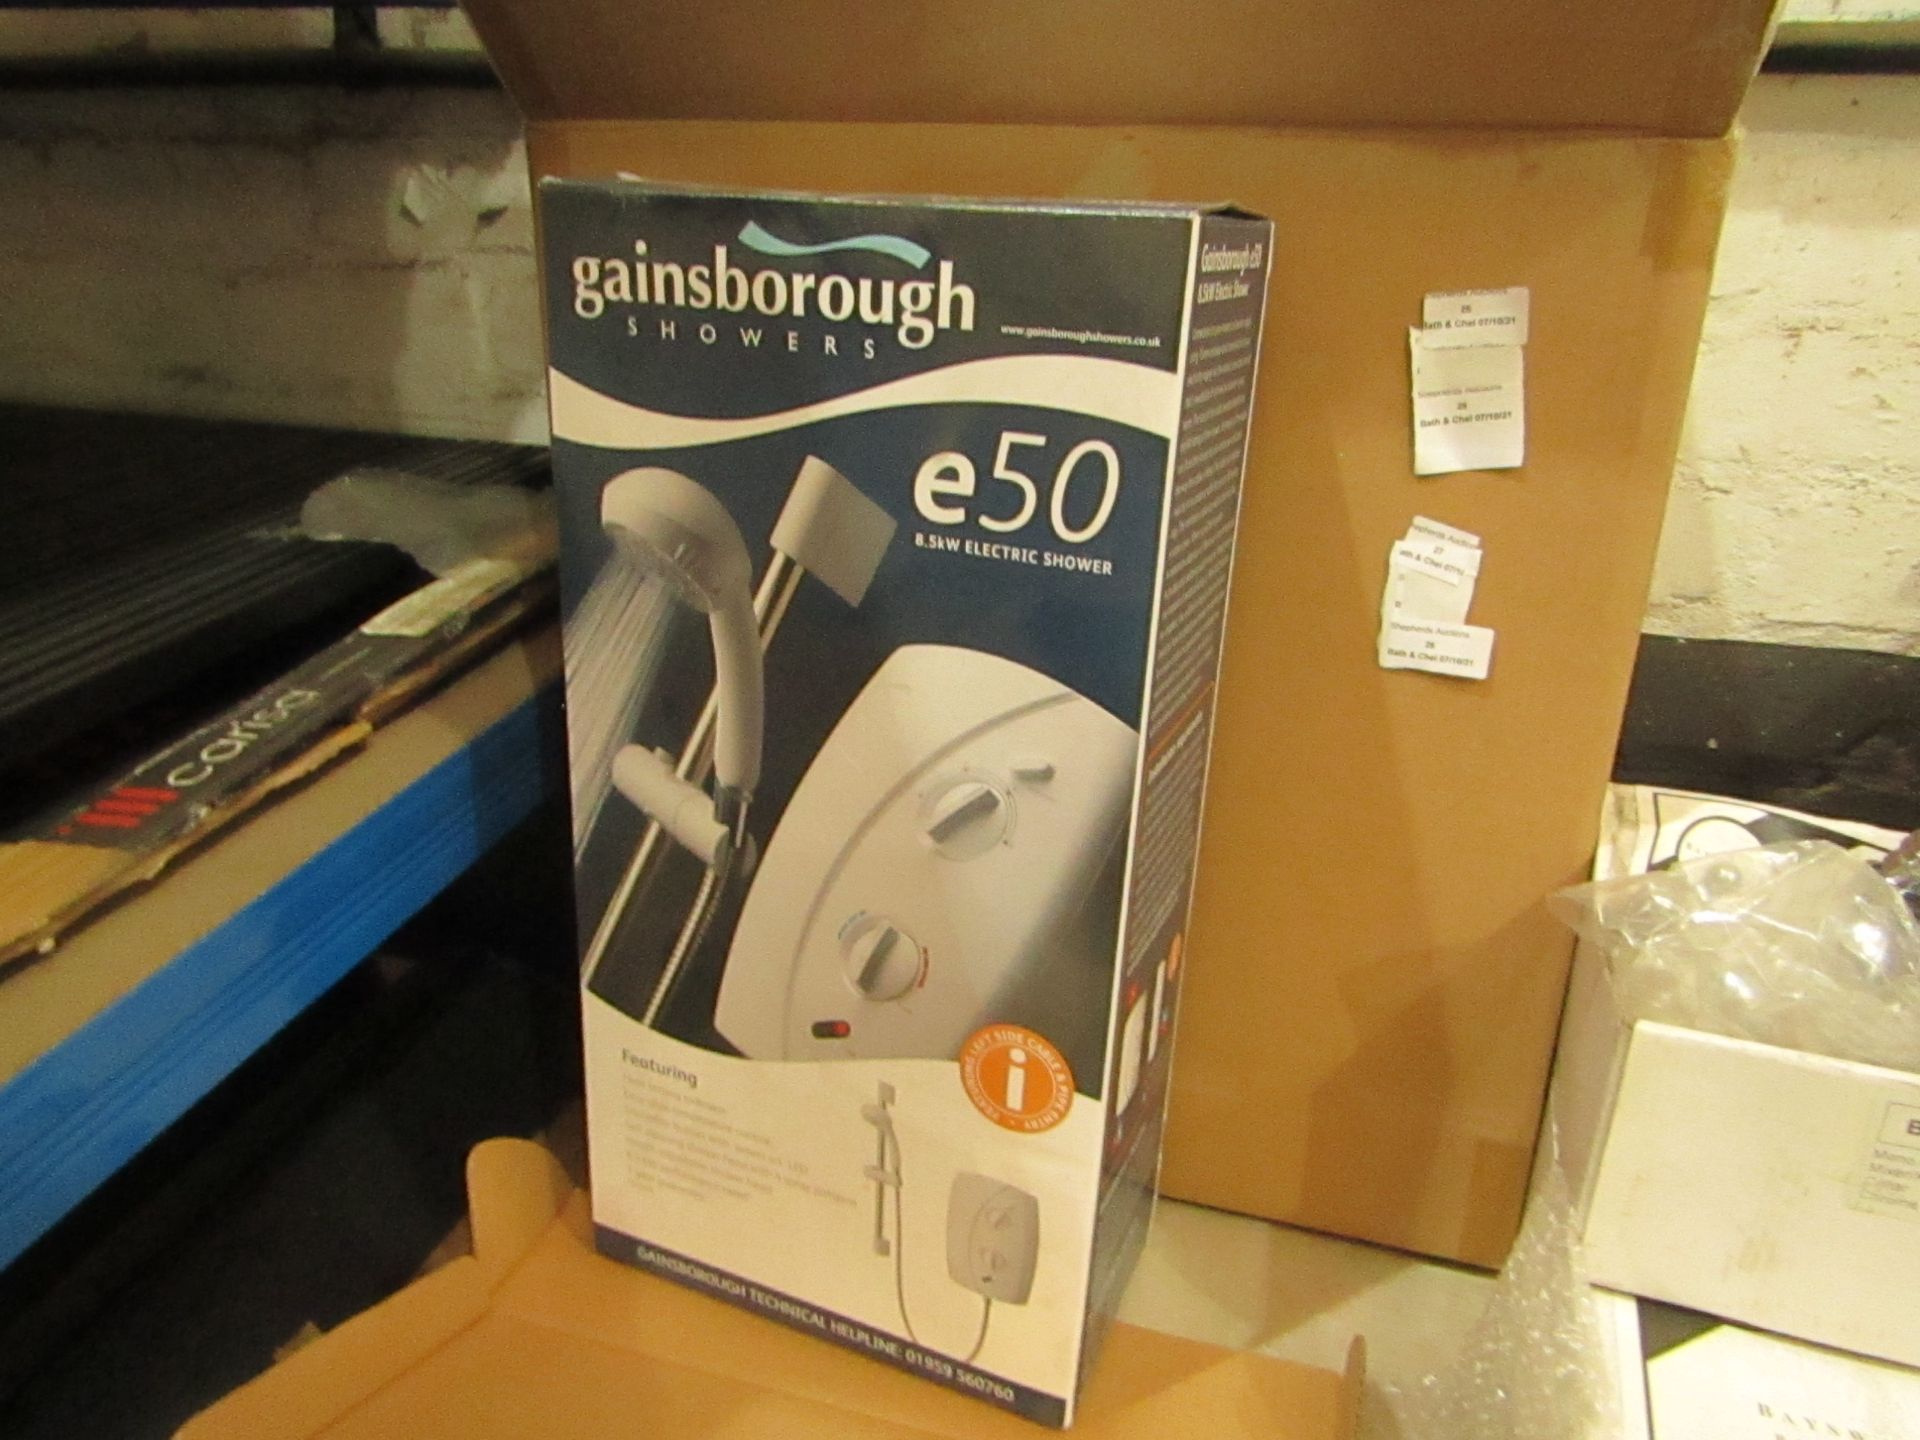 Gainsboro e50 8.5KW electric shower, new and boxed